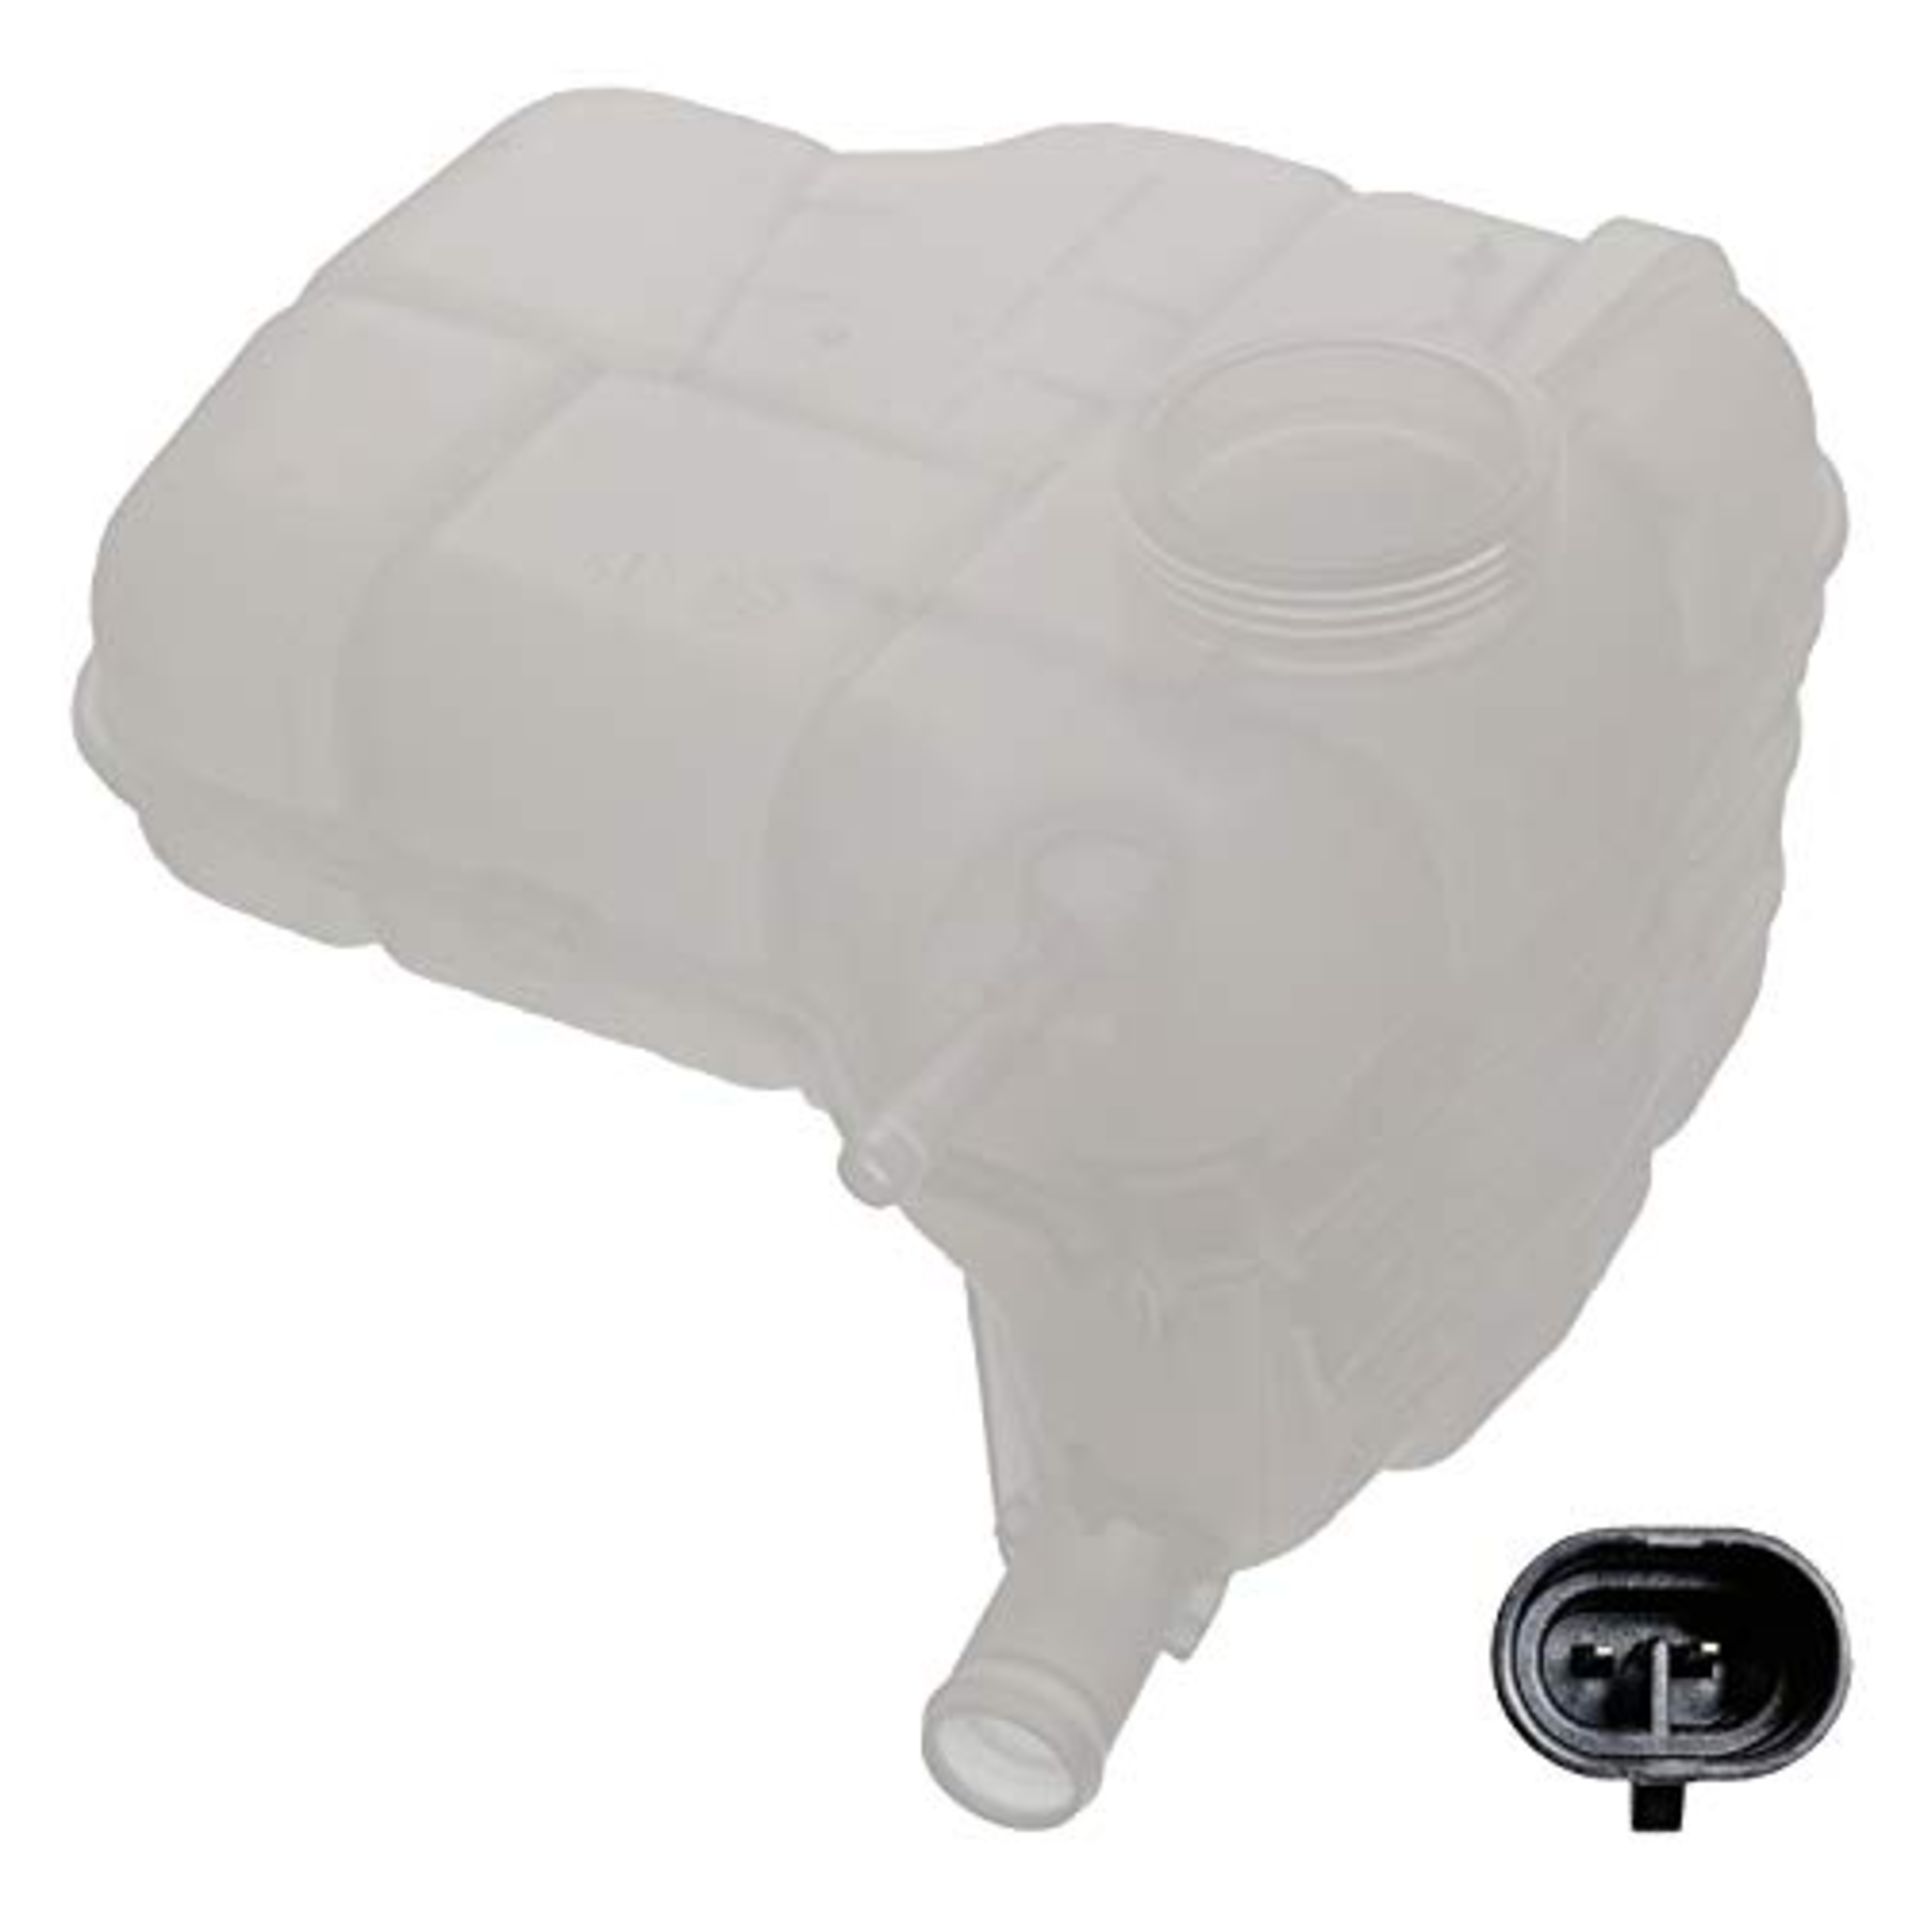 febi bilstein 47902 Coolant Expansion Tank with sensor, pack of one